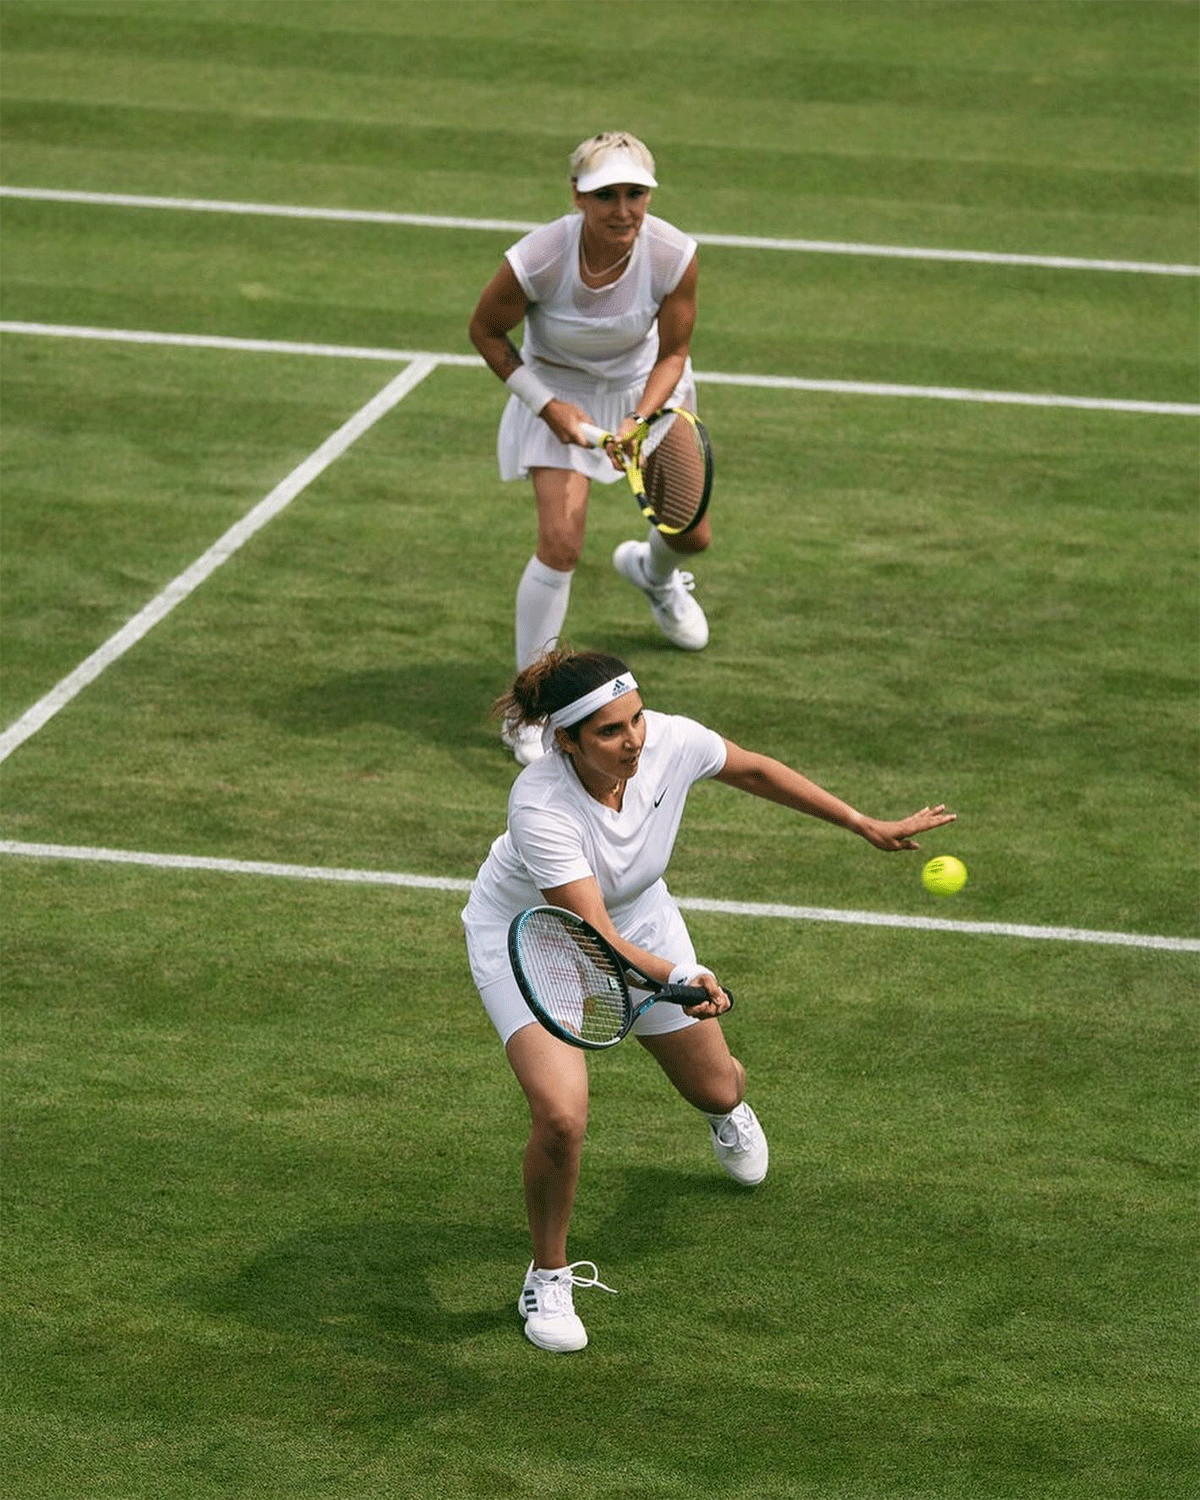 Sania Mirza and Bethanie Mattek-Sands in action during their Wimbledon doubles first-round match on Thursday